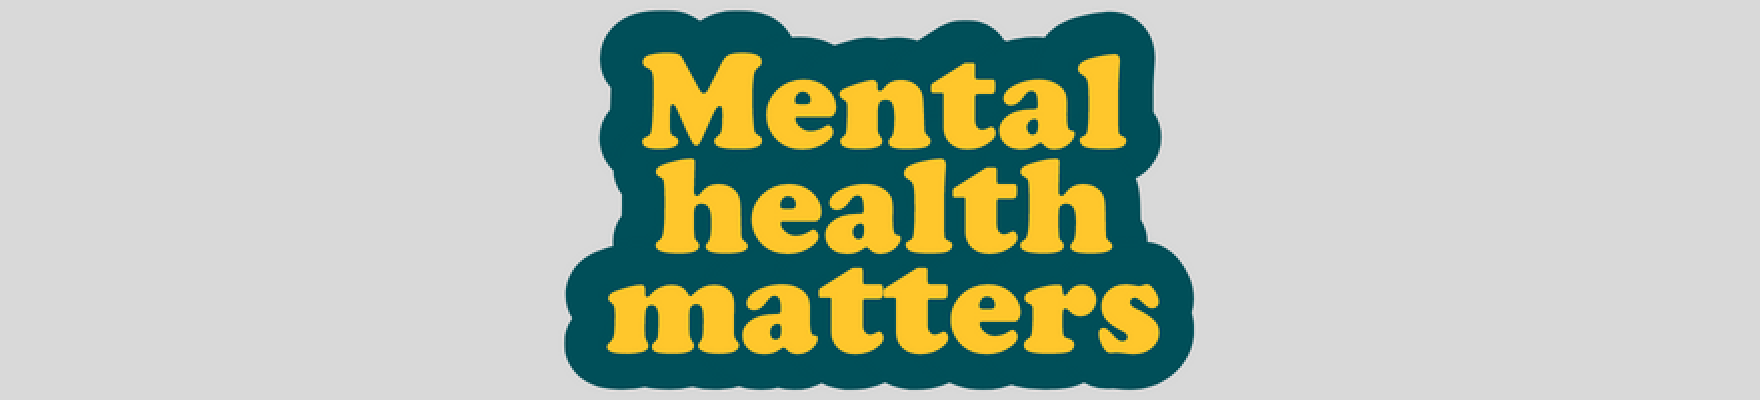 the words mental health matters